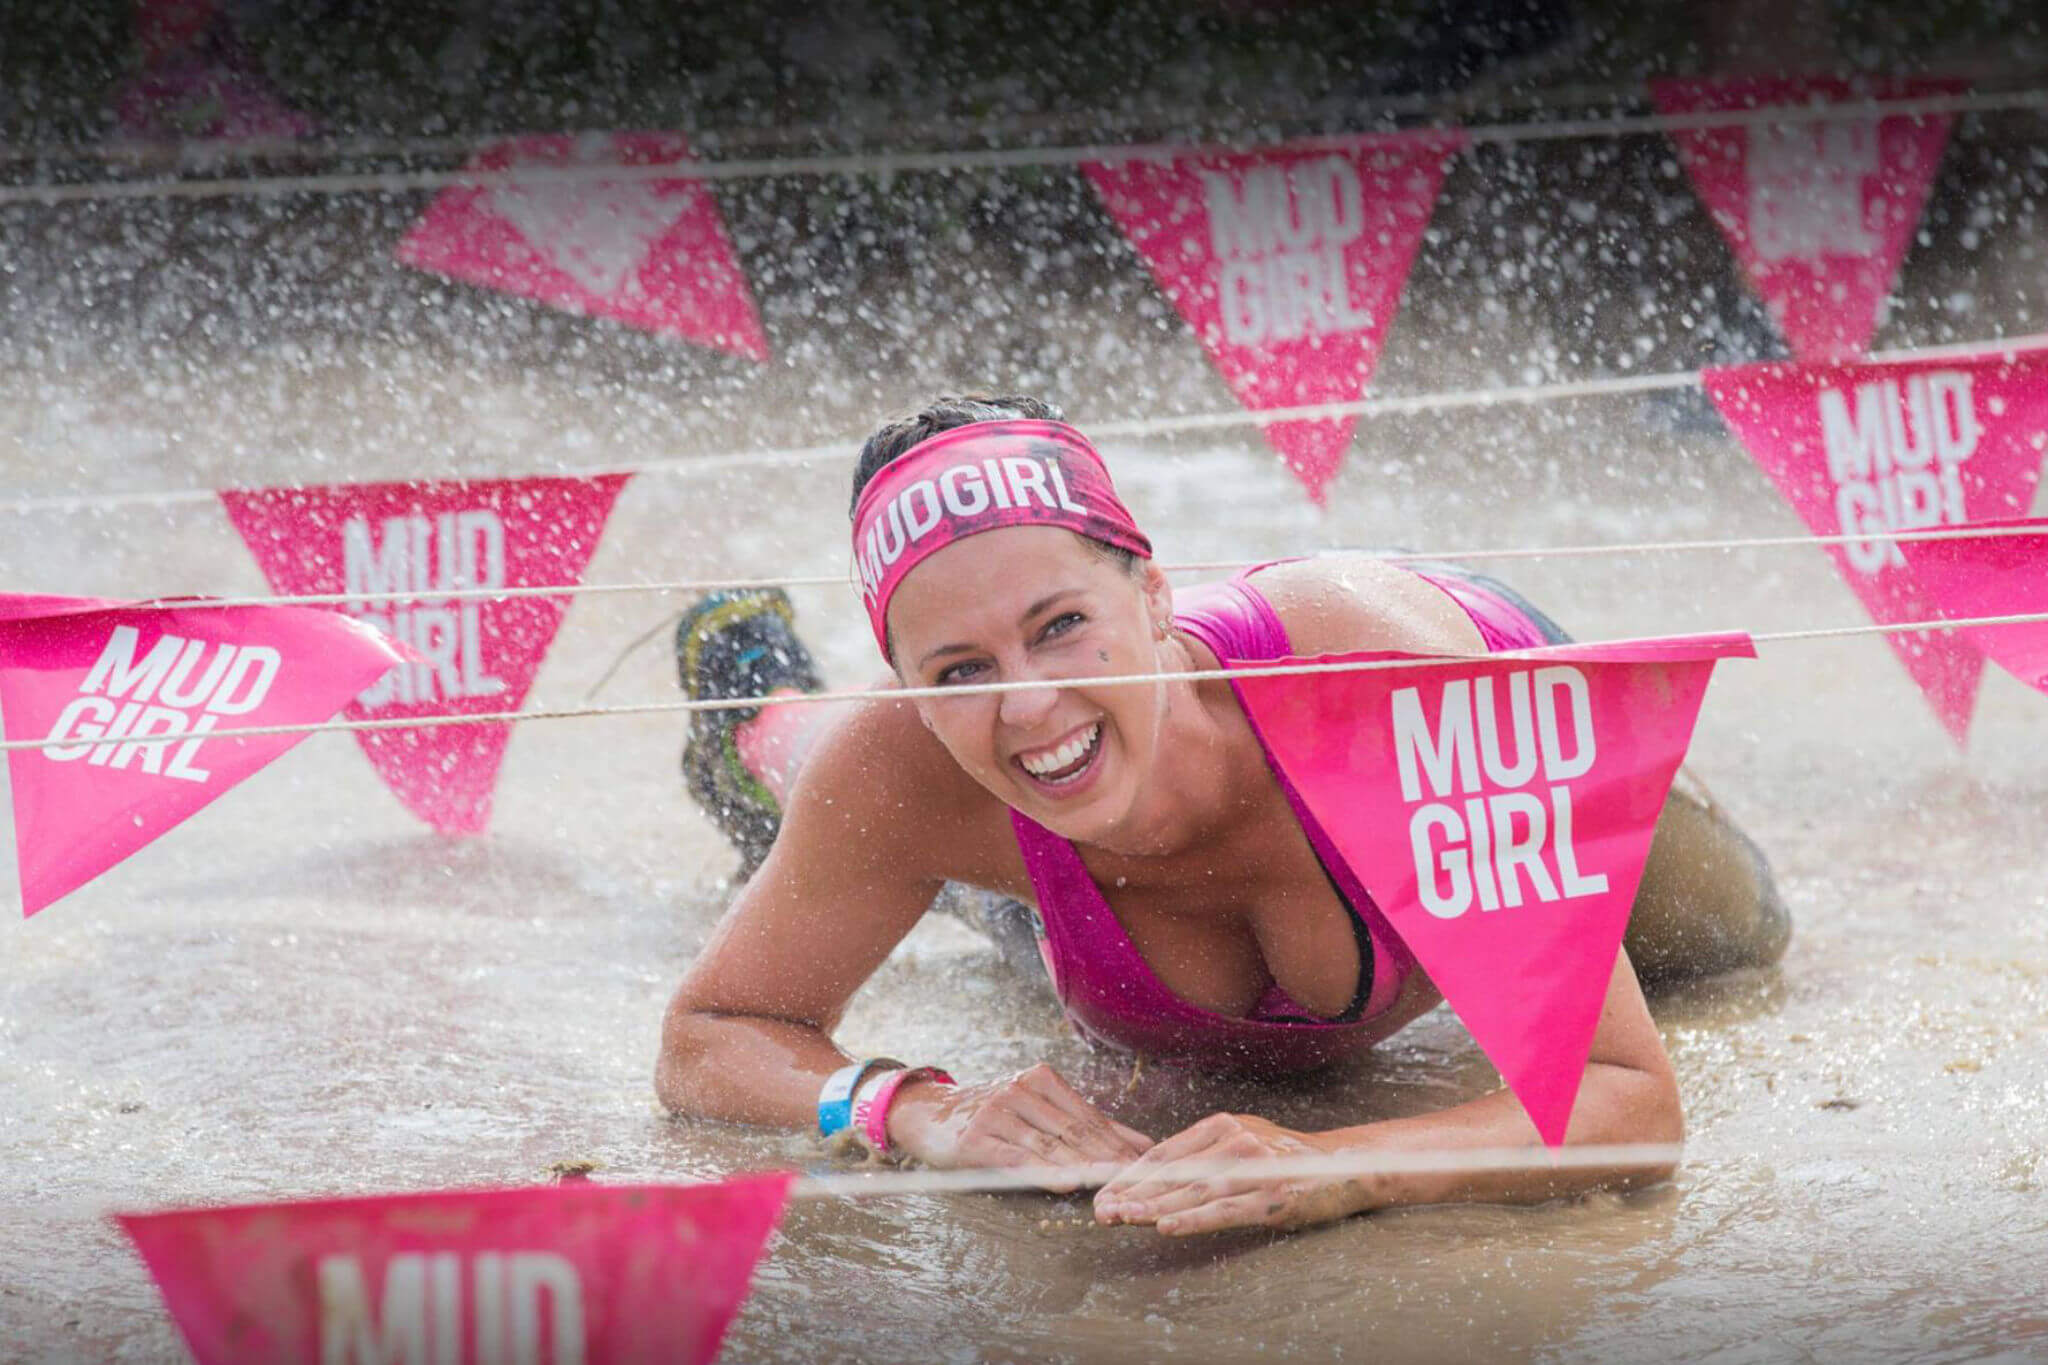 MudGirl 2021 Experience – Featured Image – Outdoor Media Works